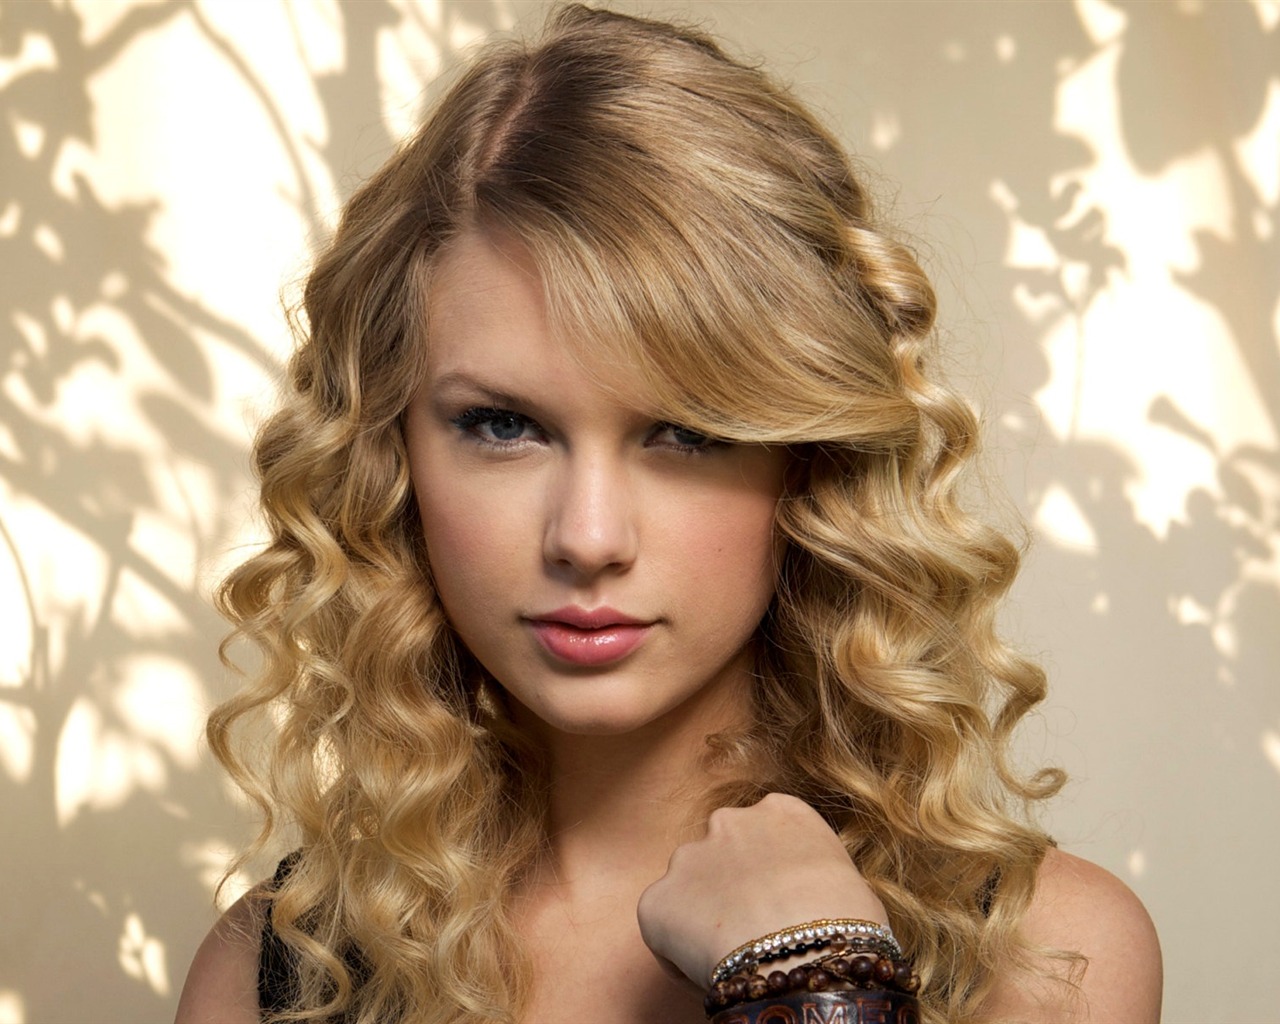 American Country Music Singer Taylor Swift Wallpaper